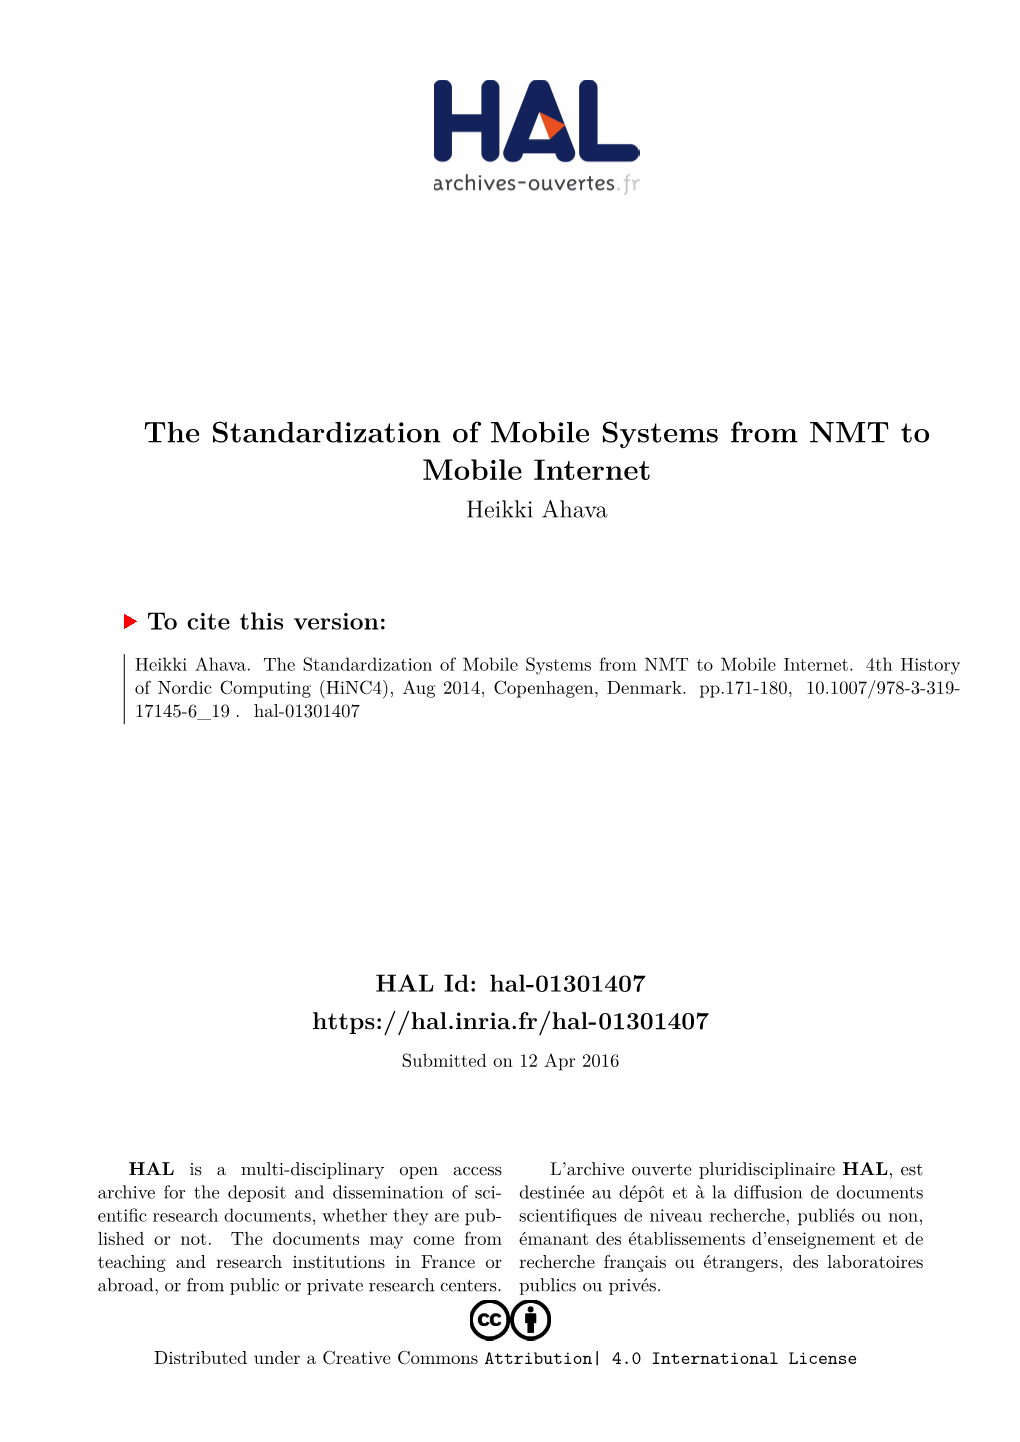 The Standardization of Mobile Systems from NMT to Mobile Internet Heikki Ahava